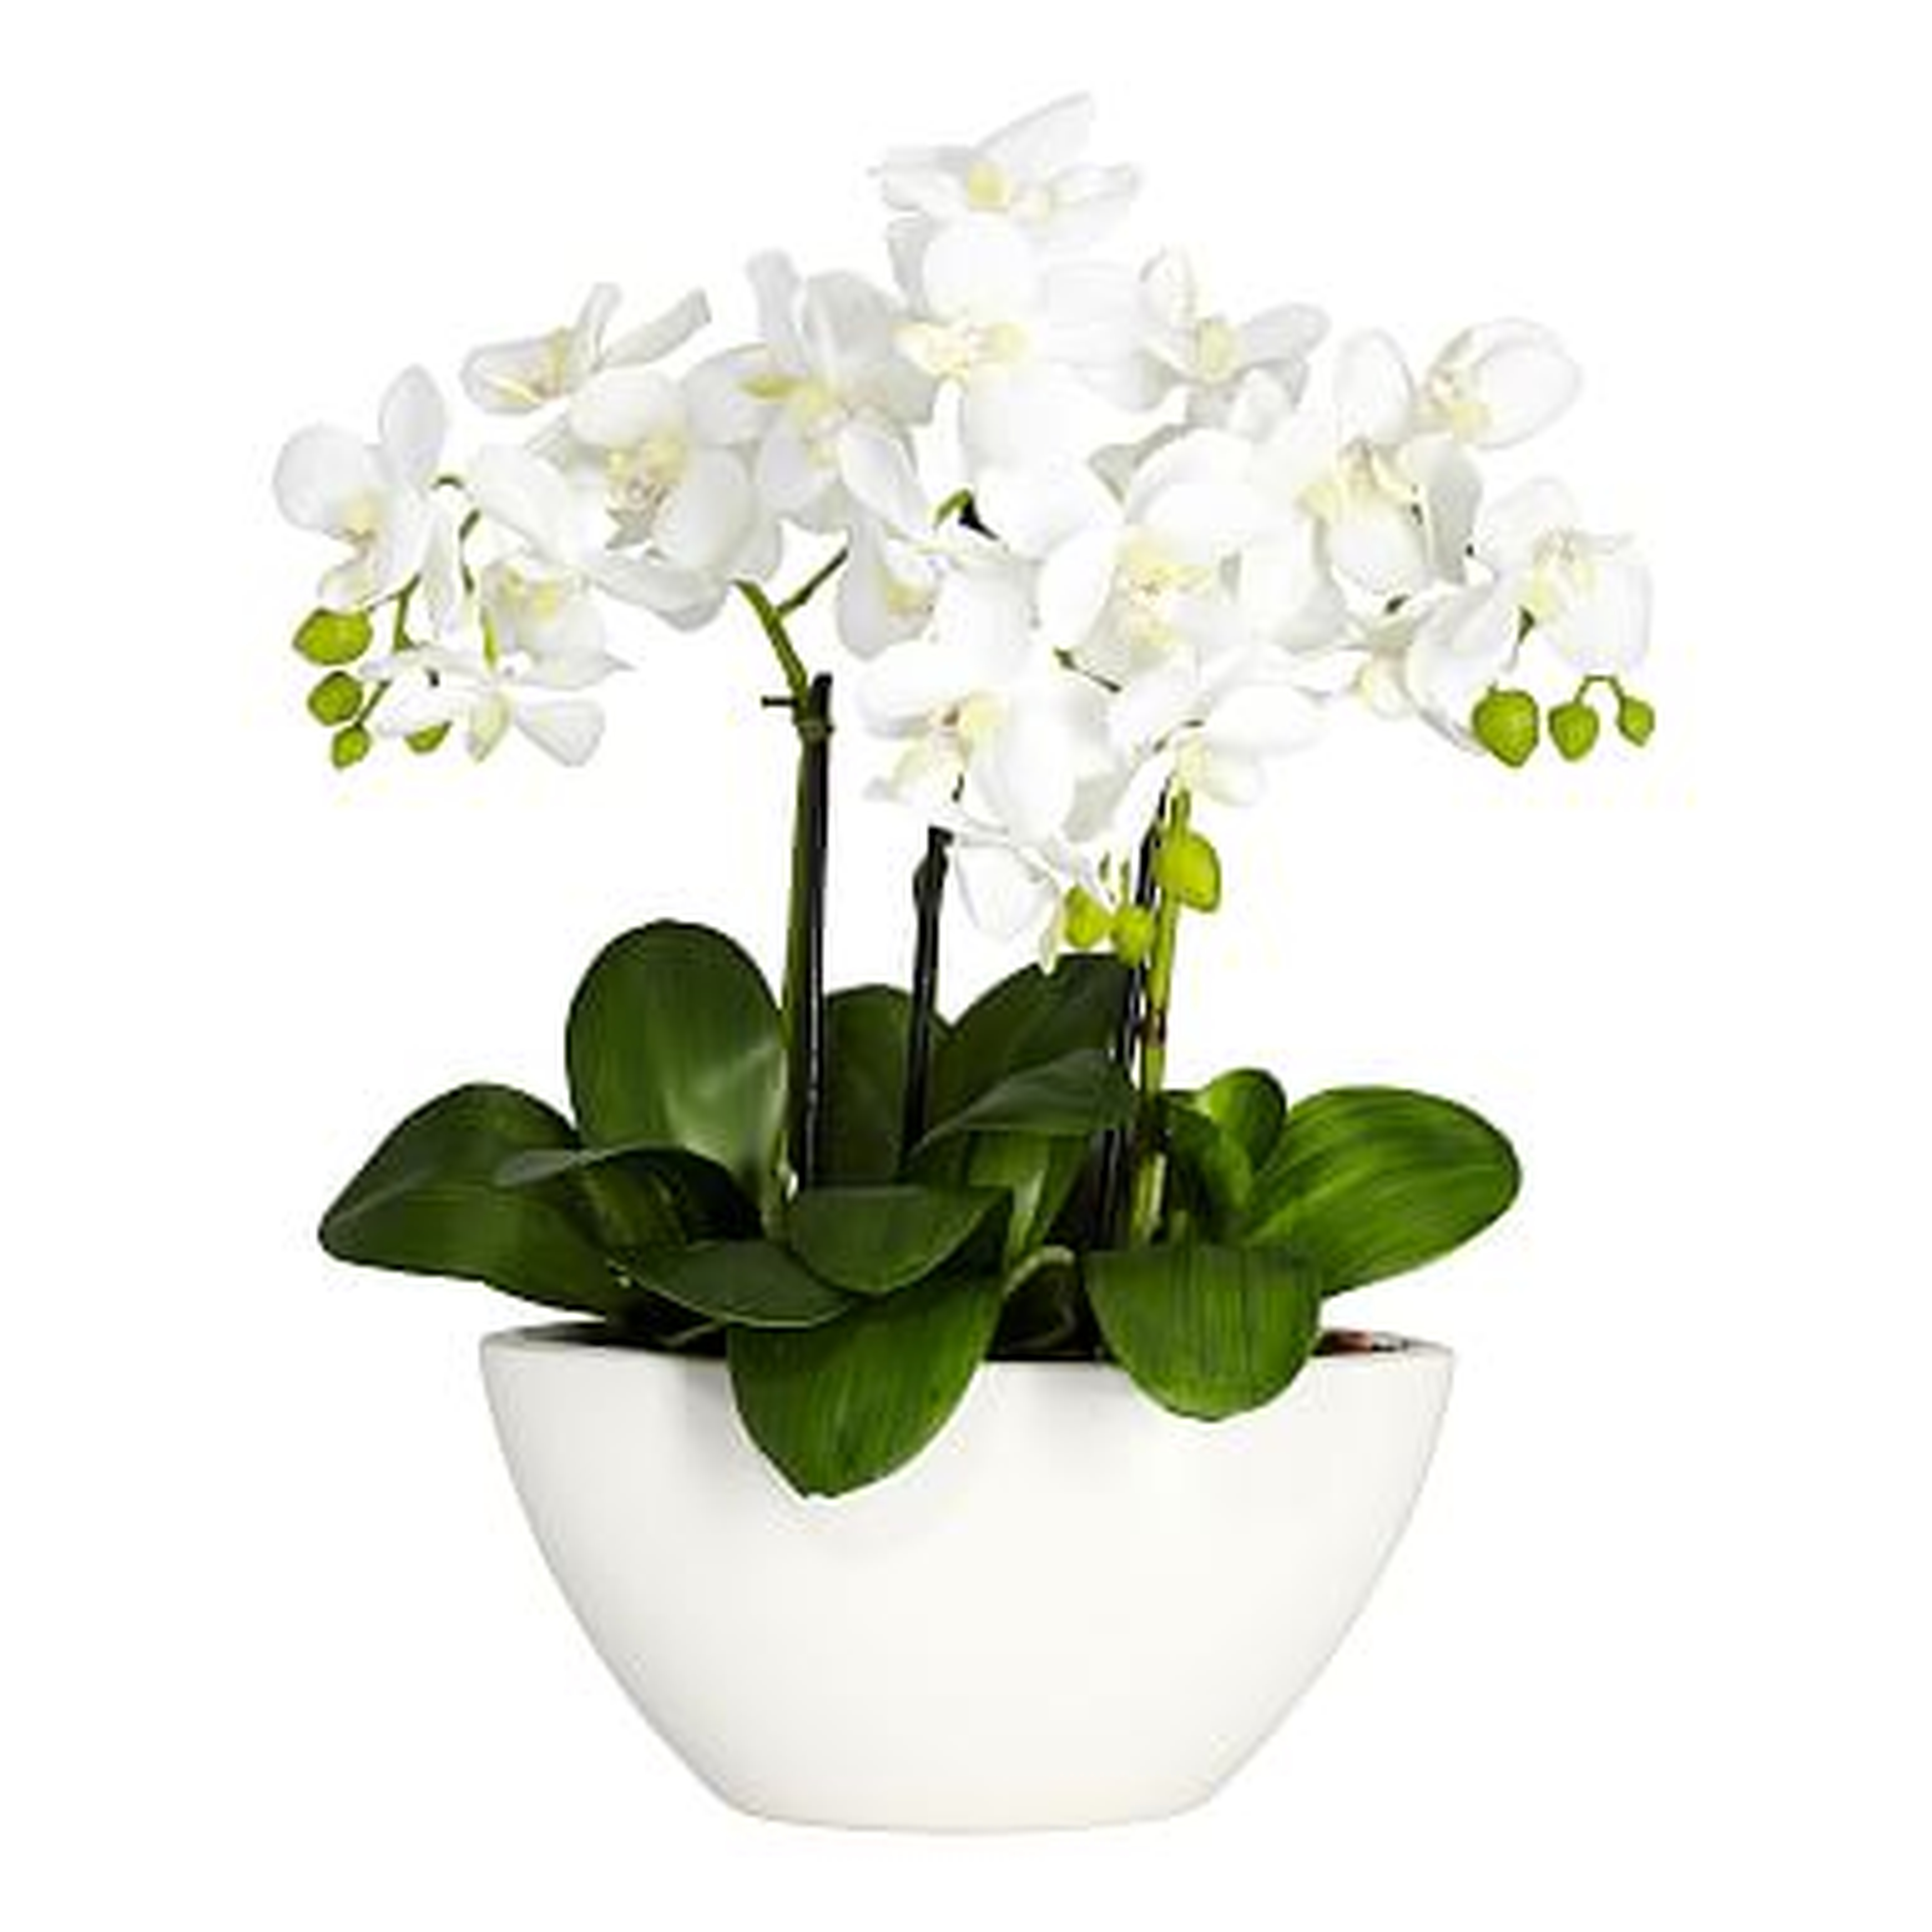 Faux Potted Orchid Arrangement - Pottery Barn Teen